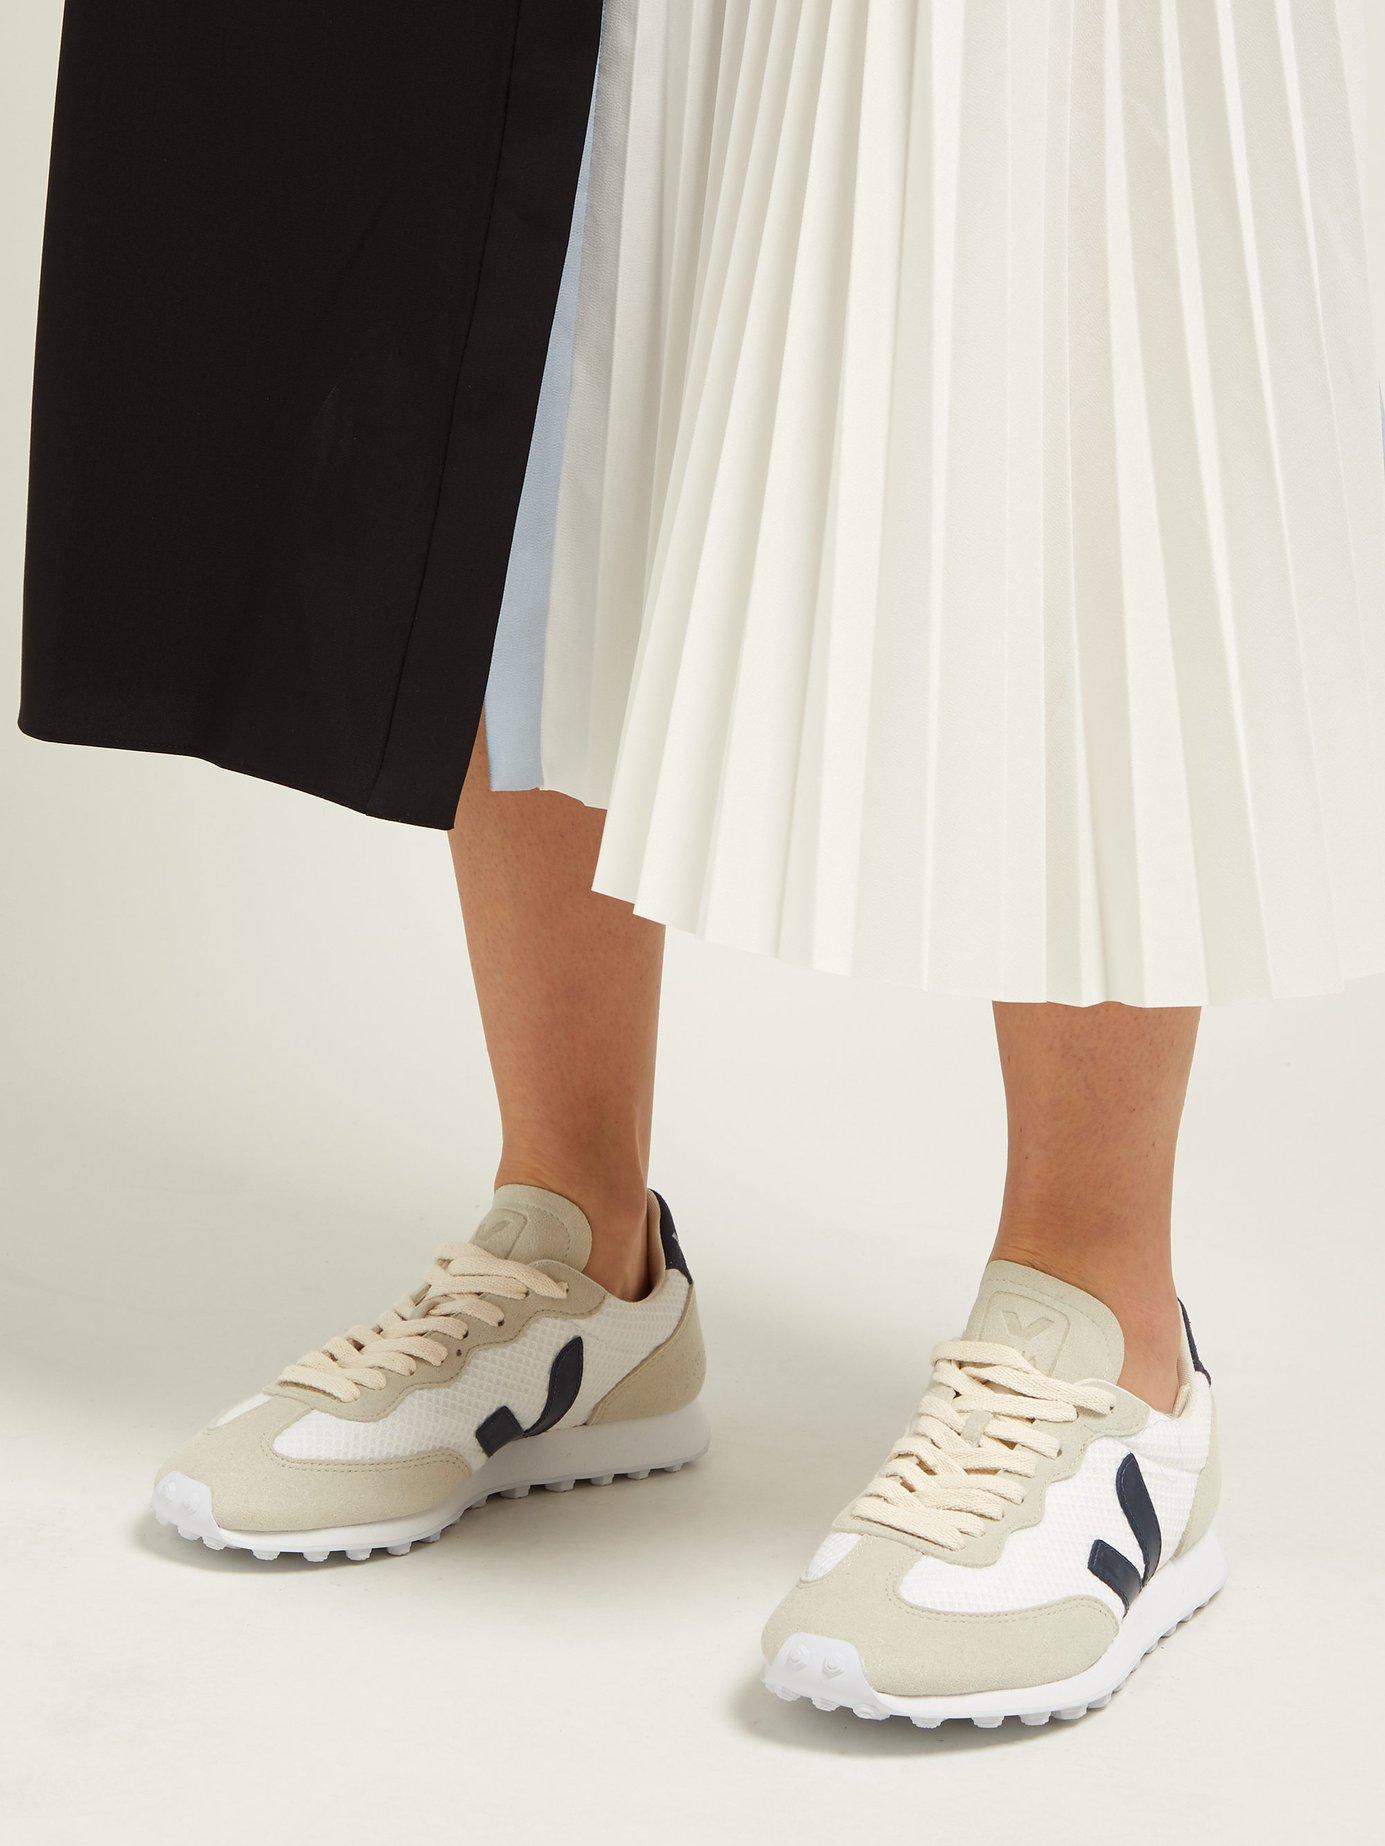 Veja Rio Branco Low Top Mesh Trainers in White | Lyst